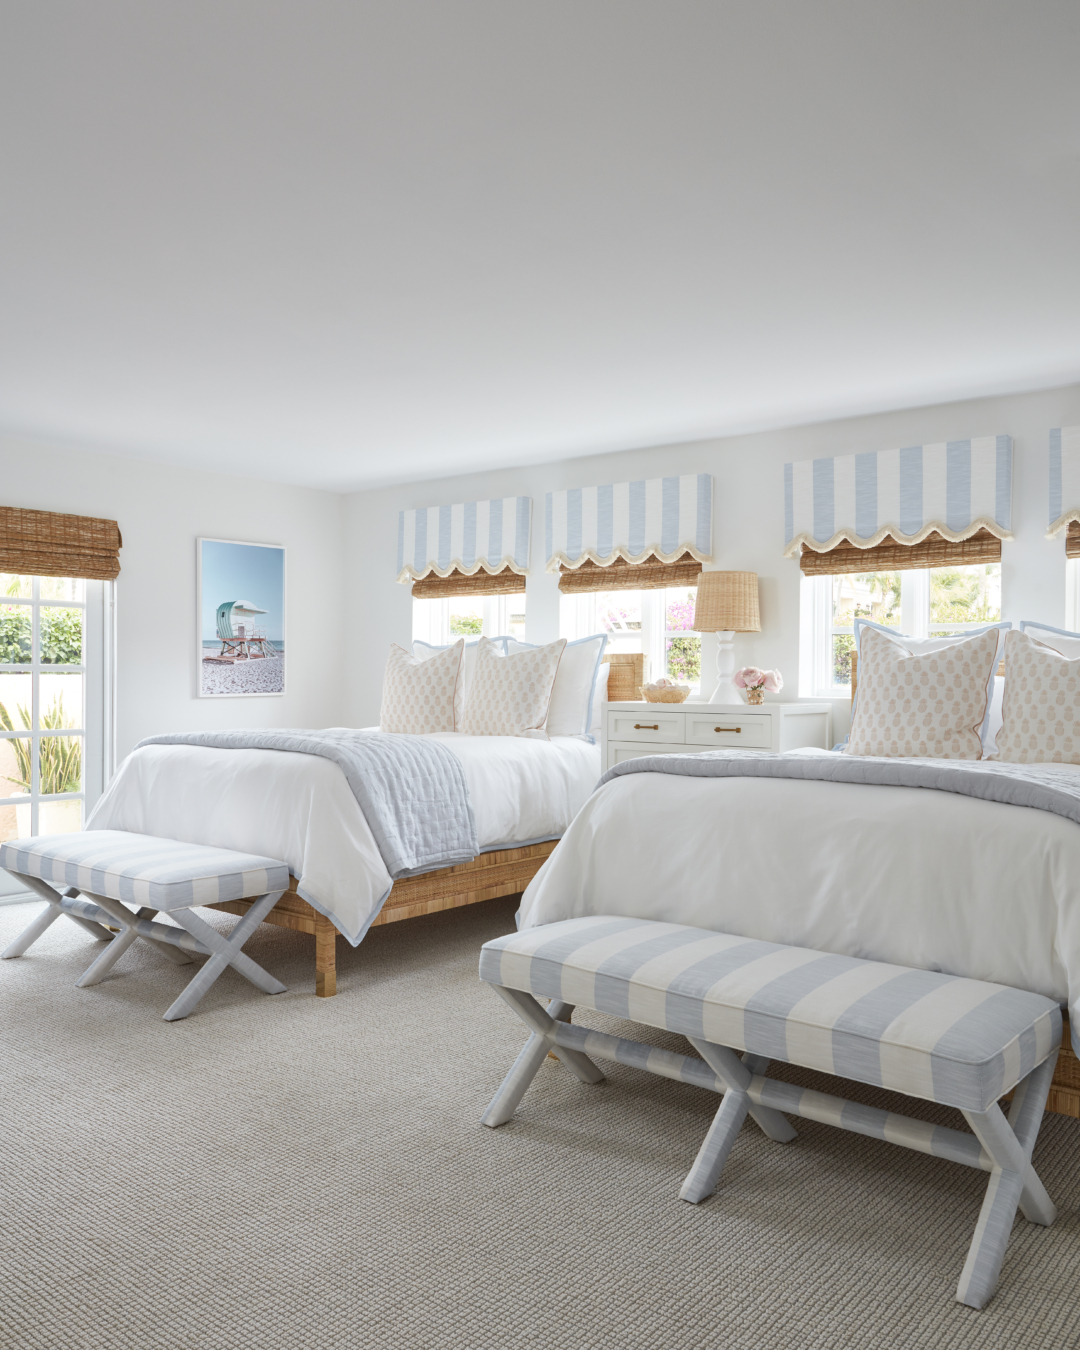 Travel: Welcome to the "Sisters Suiite" by Serena & Lily and Palm Beach Lately at The Colony Hotel